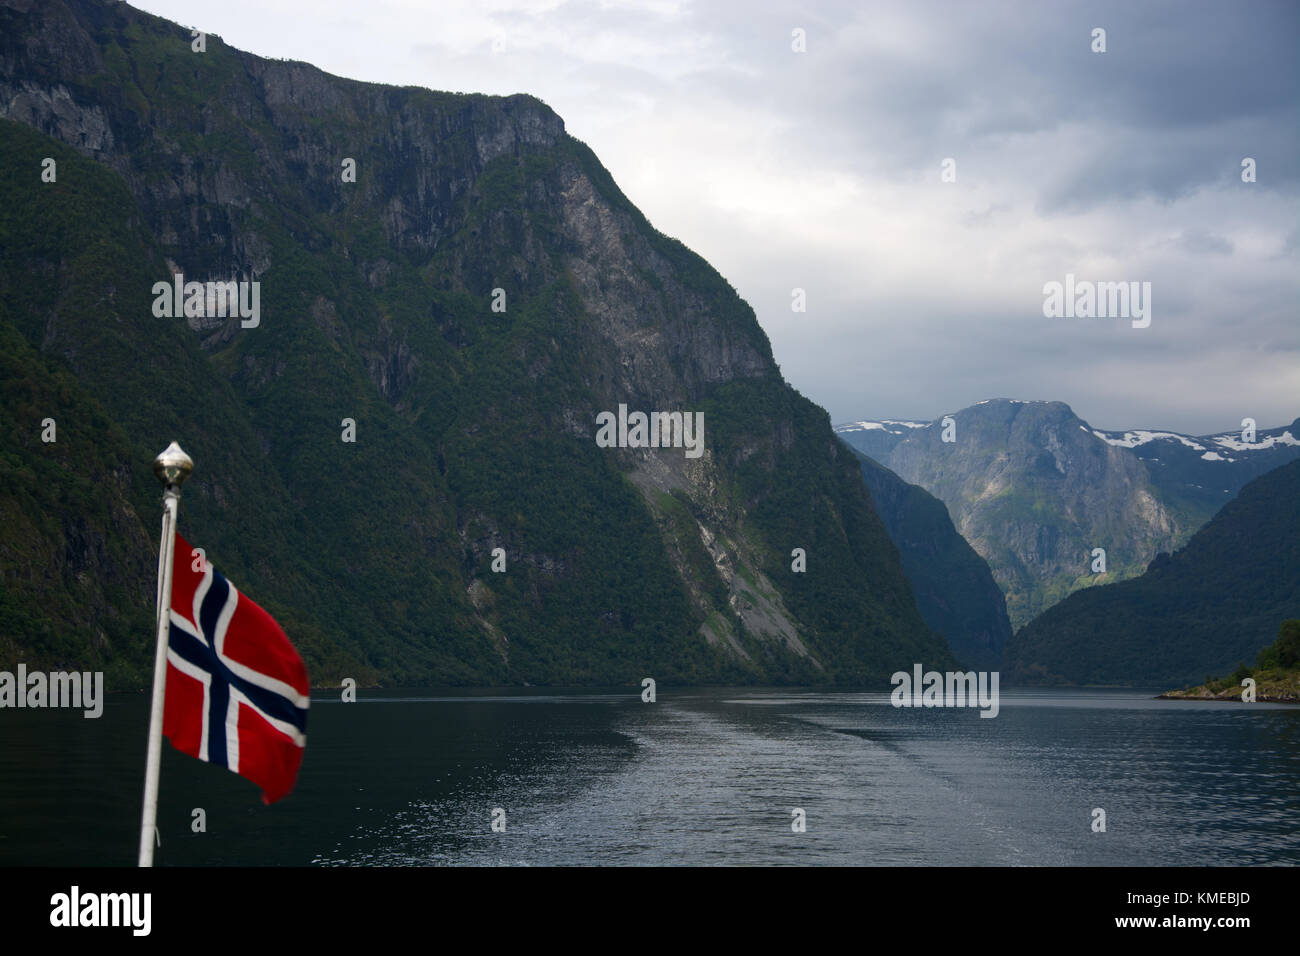 The Naeroyfjord is a fjord in the municipality of Aurland in Sogn og Fjordane, Norway. Stock Photo